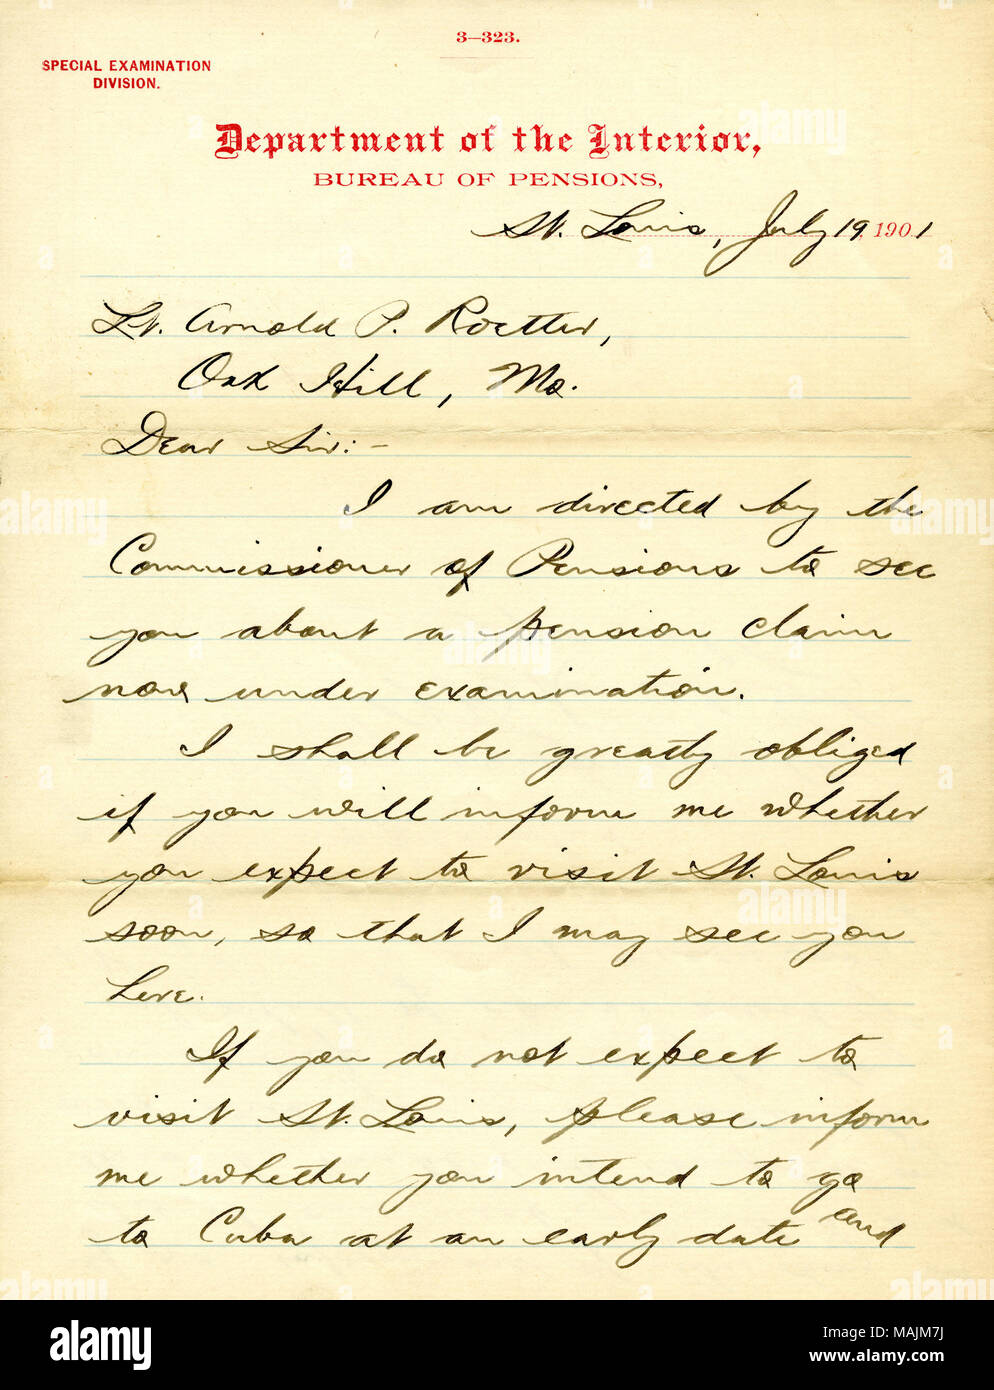 Requests Roetter's assistance with a pension claim. Inquires if he will be in St. Louis soon. Title: Letter of Department of the Interior, Bureau of Pensions, St. Louis, to Lt. Arnold P. Roetter, Oak Hill, Mo., July 19, 1901  . 19 July 1901. United States. Pension Bureau Stock Photo